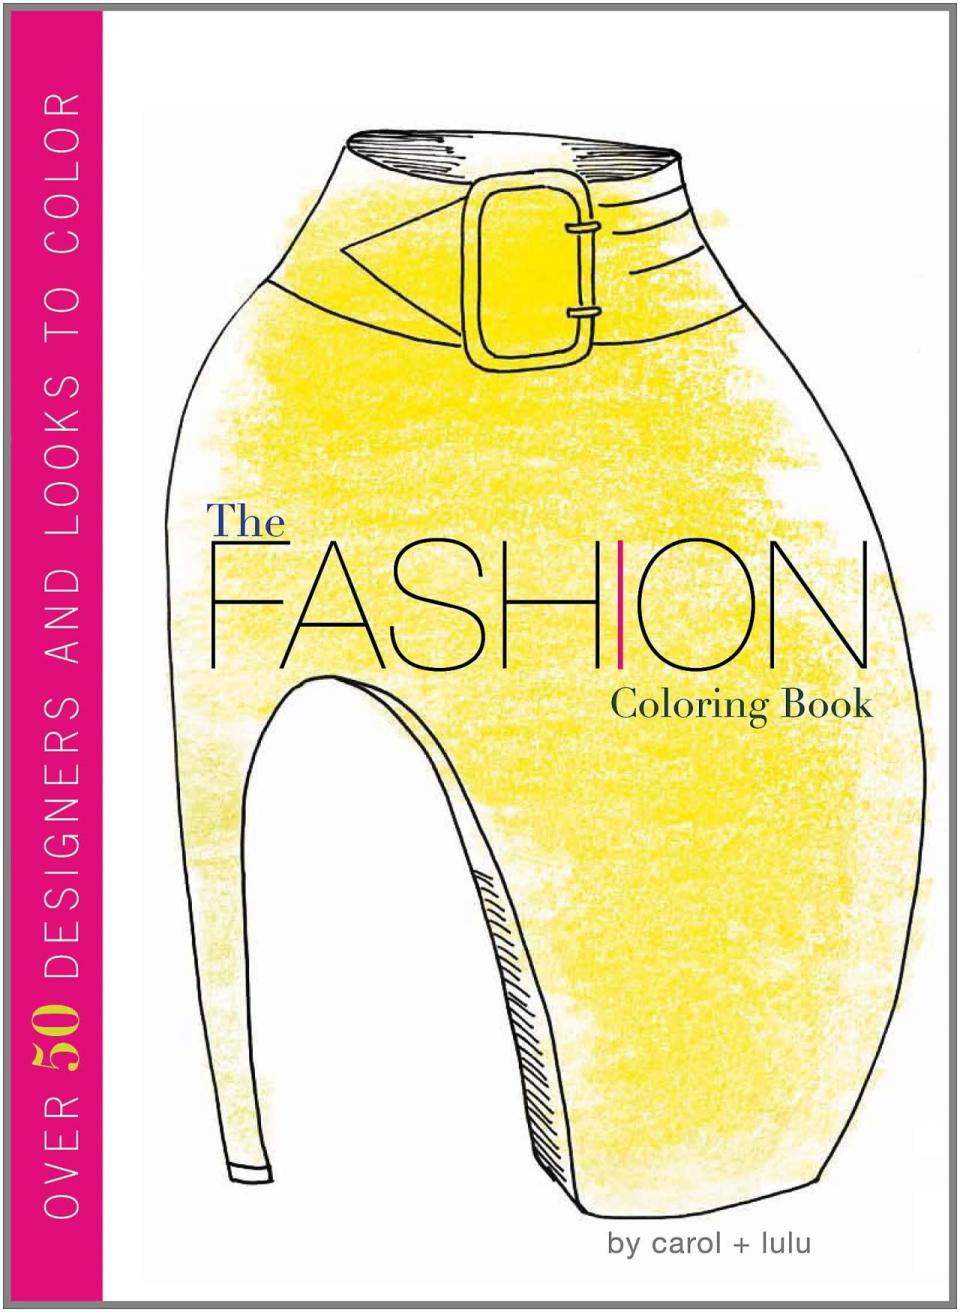 The Fashion Colouring Book: Iconic images like the armadillo shoe by Alexander McQueen provide a blank canvas for creation.